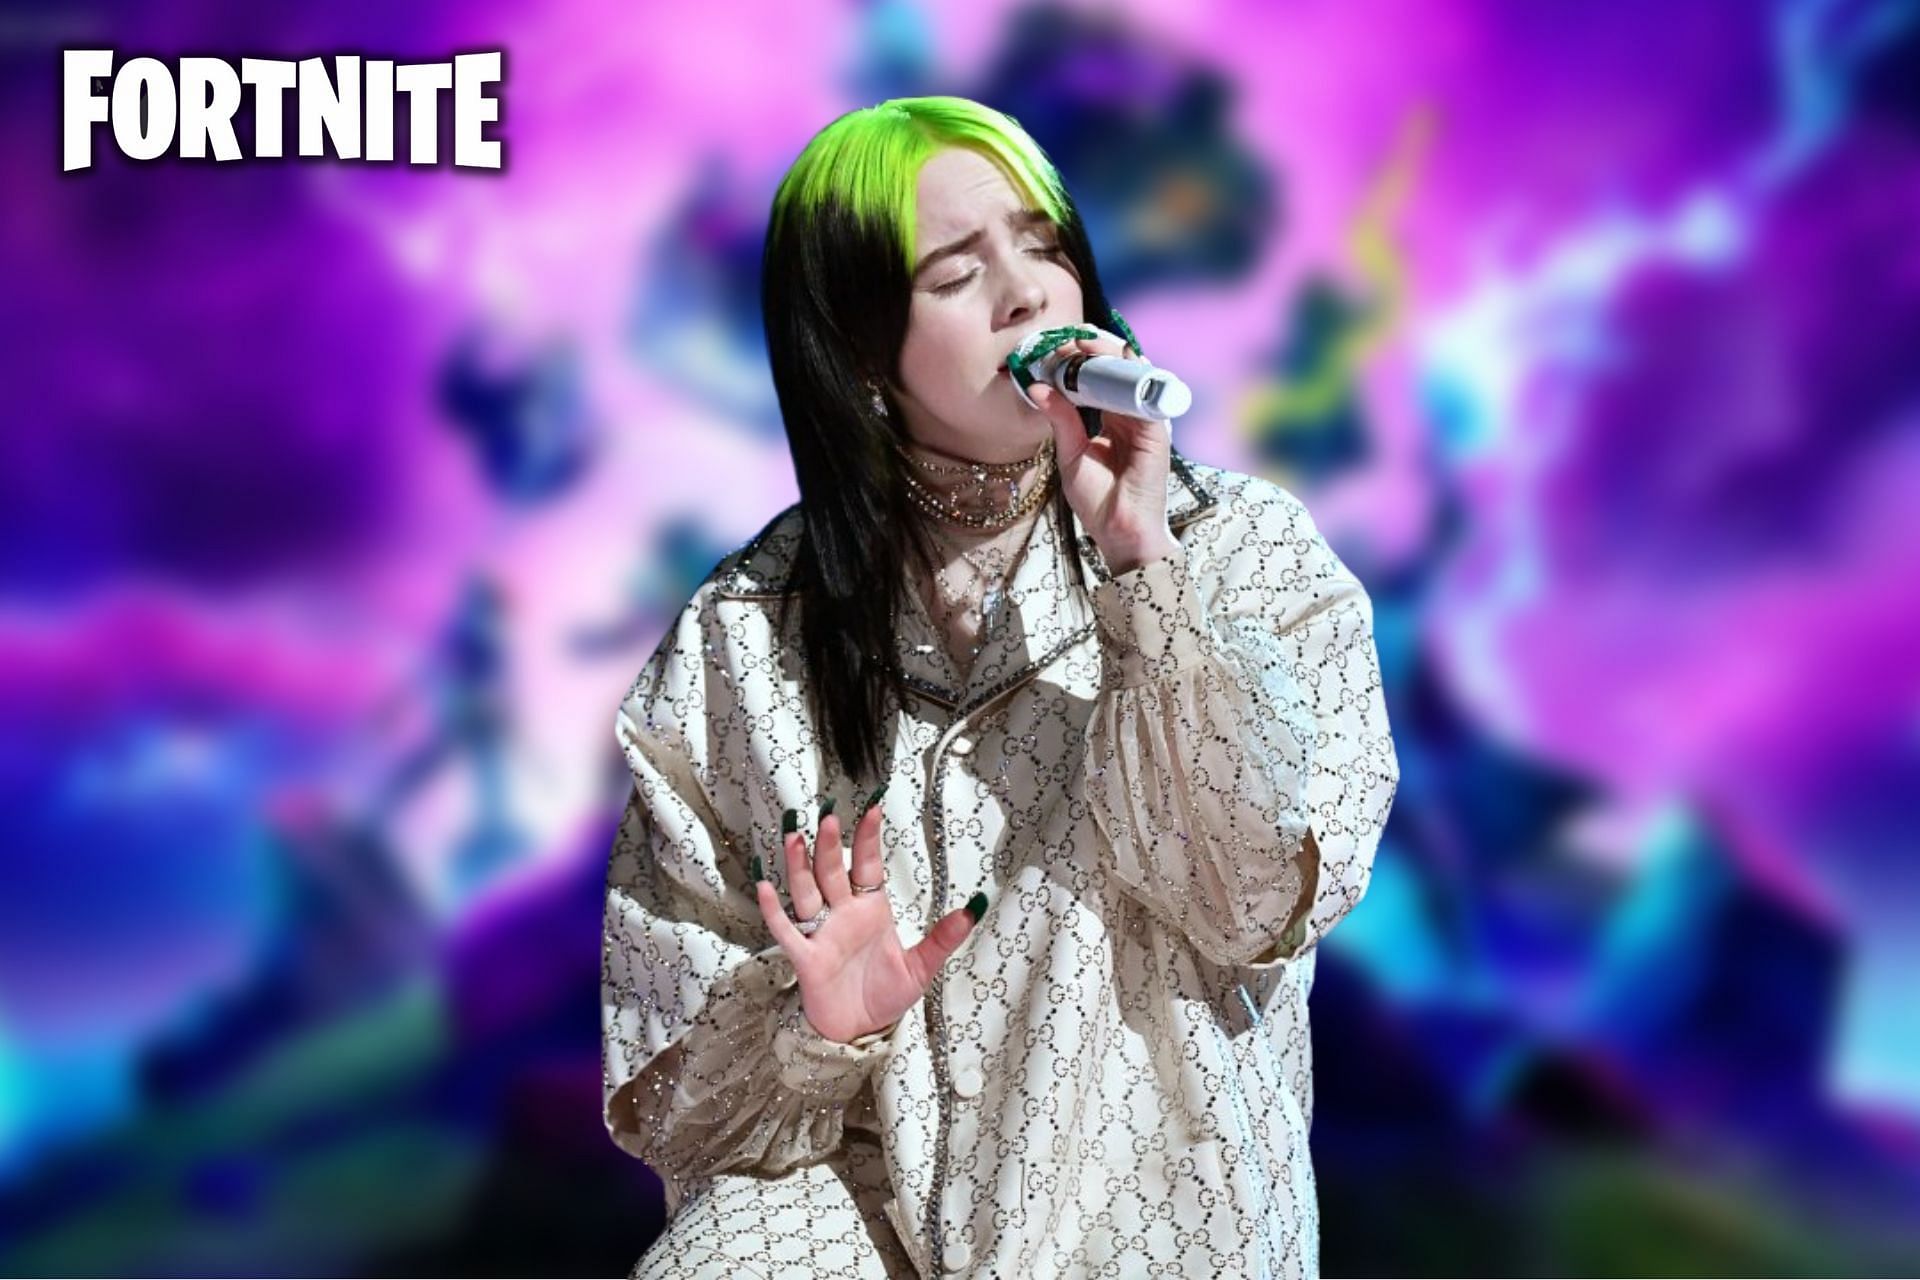 Will Billie Eilish appear in the Riot Games Music League of Legends  universe?